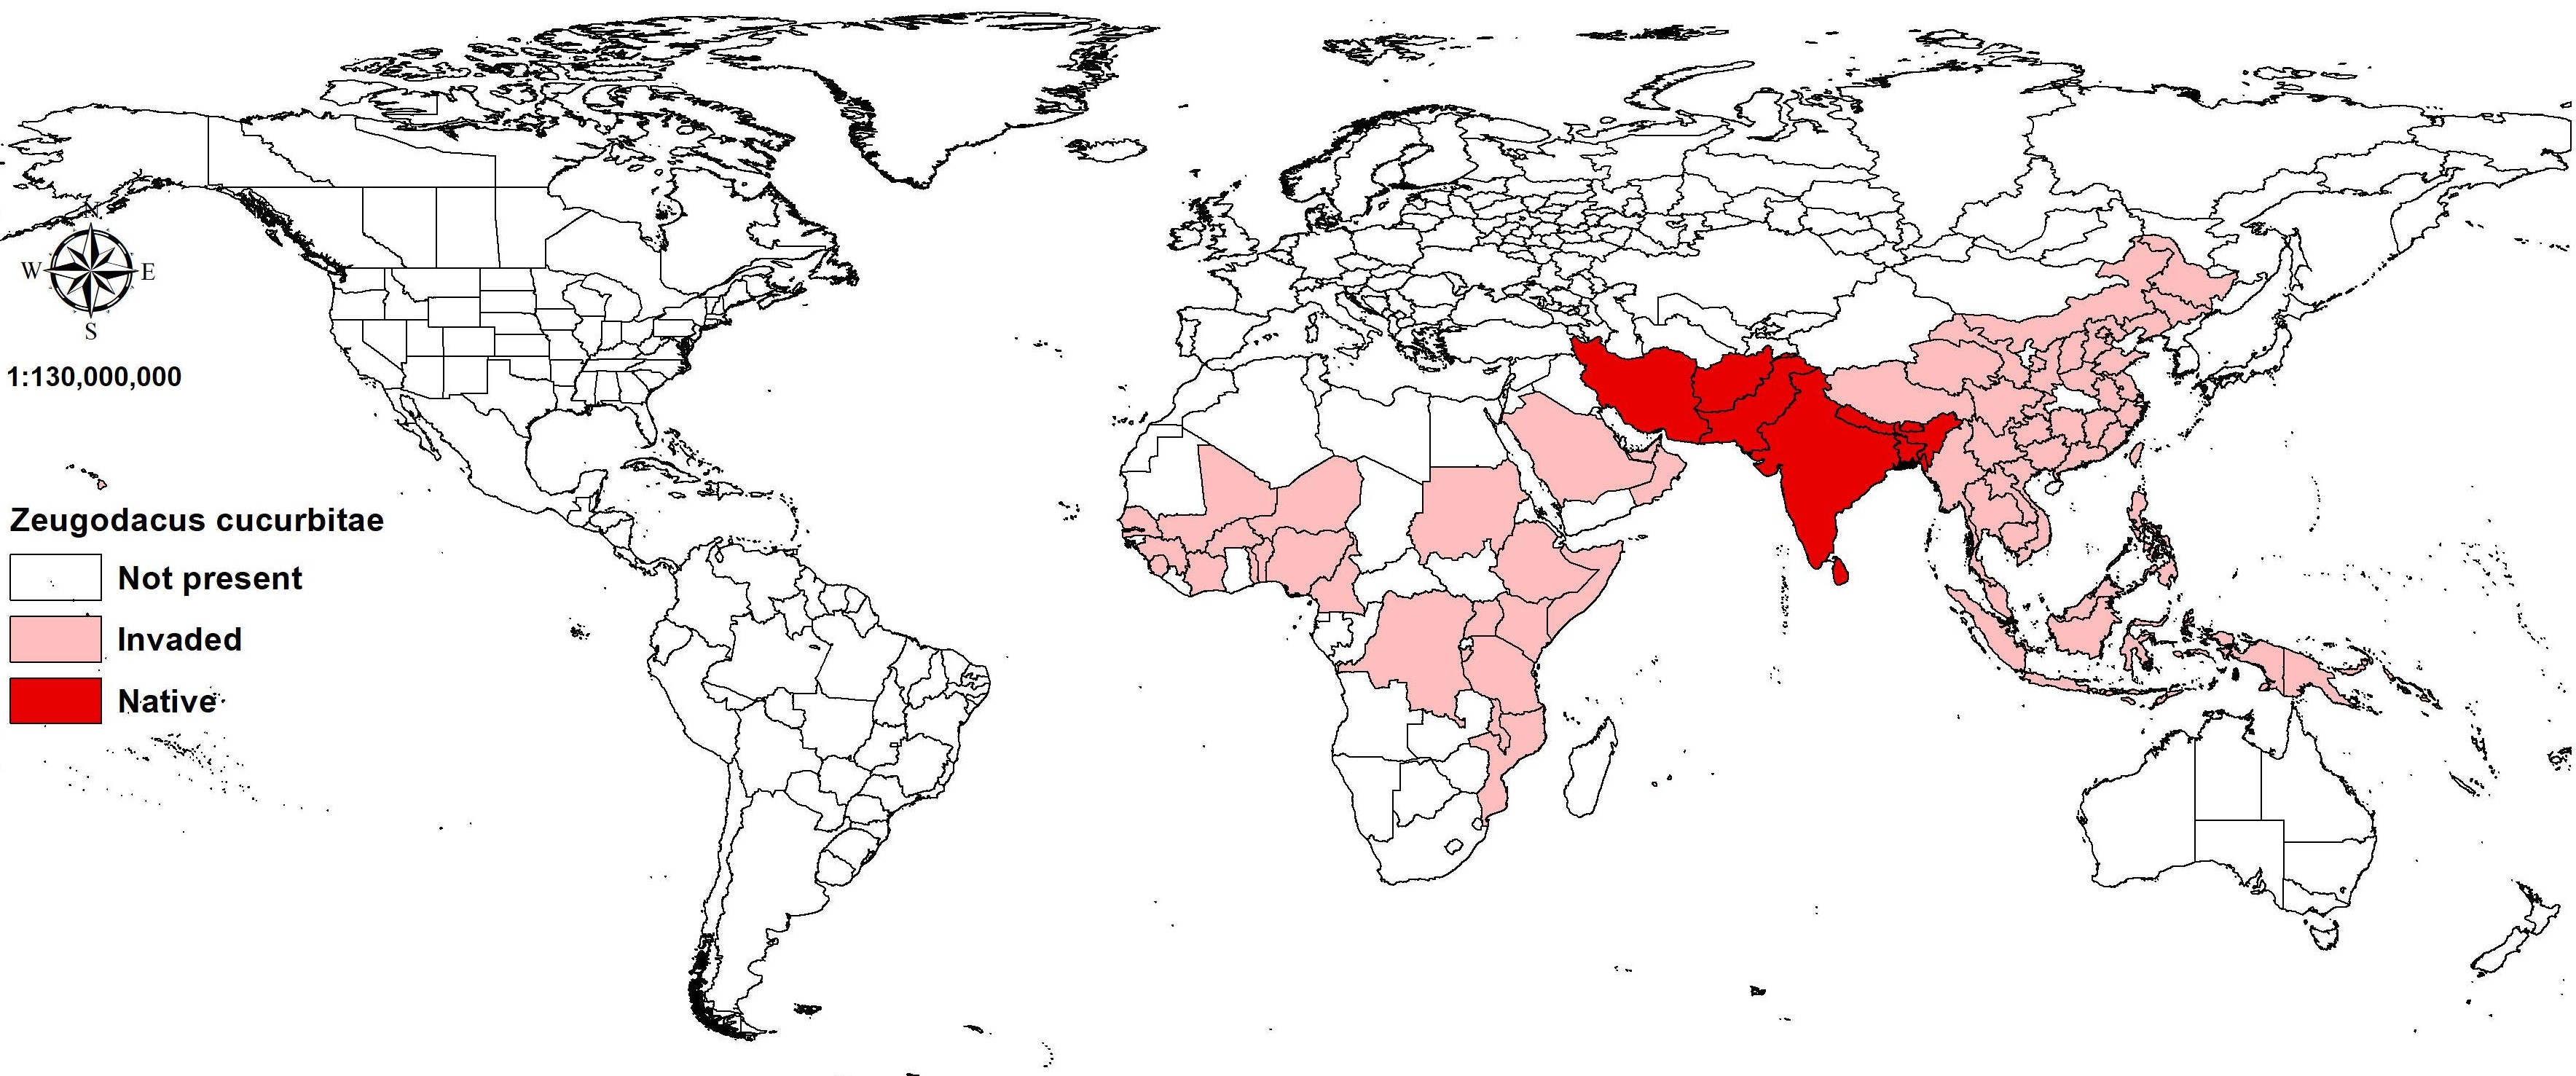 World map showing the distribution of the melon fly including Asia, parts of Africa, and Australia.